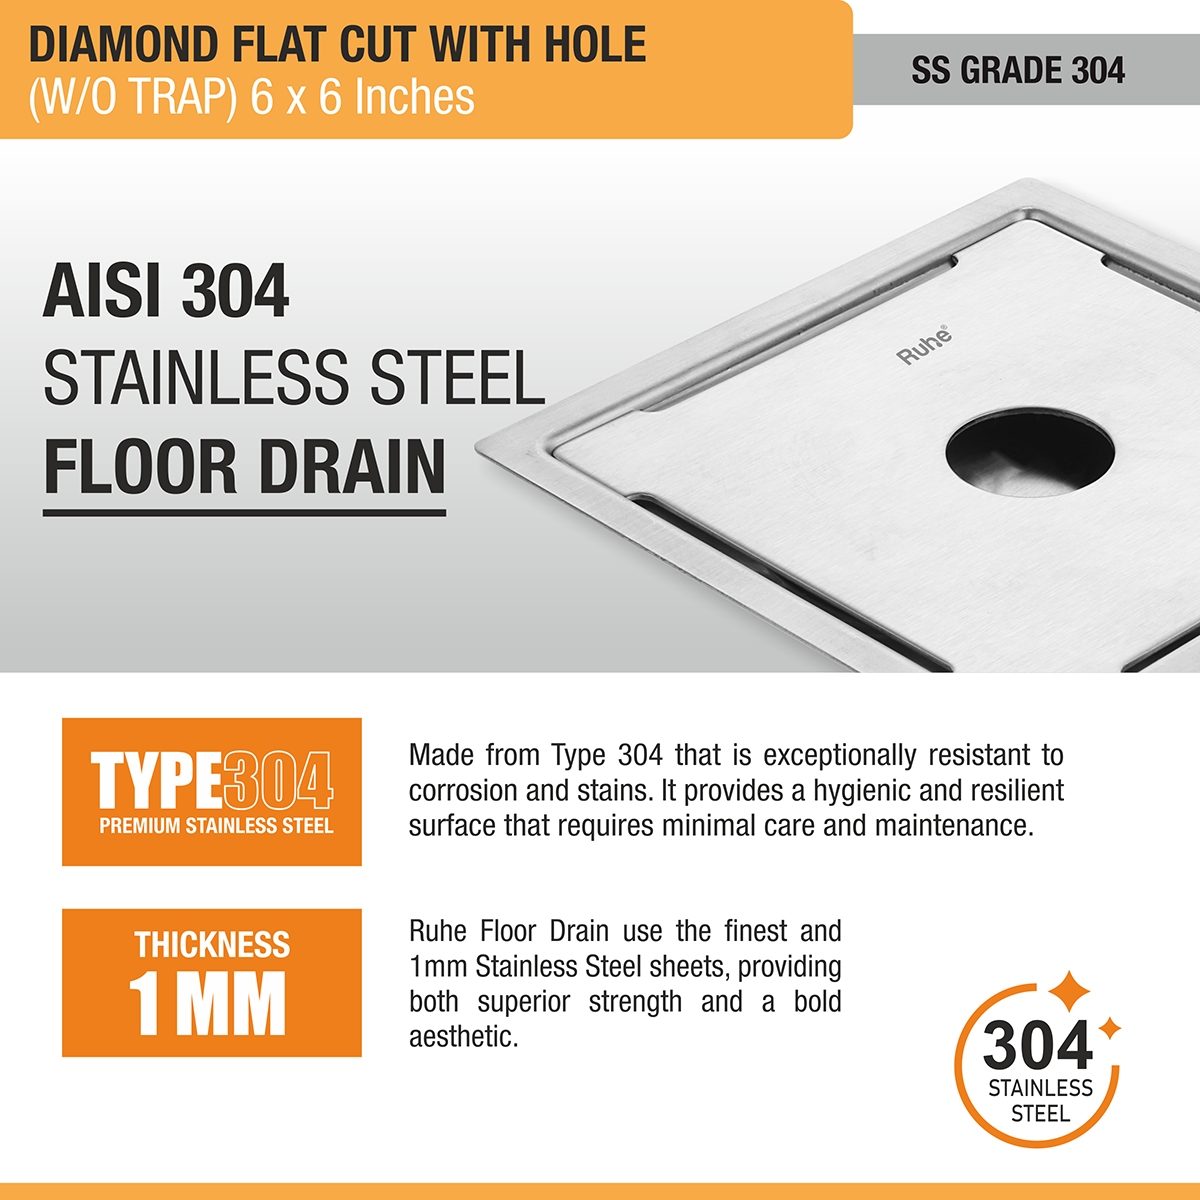 Diamond Square Flat Cut 304-Grade Floor Drain with Hole (6 x 6 Inches) stainless steel